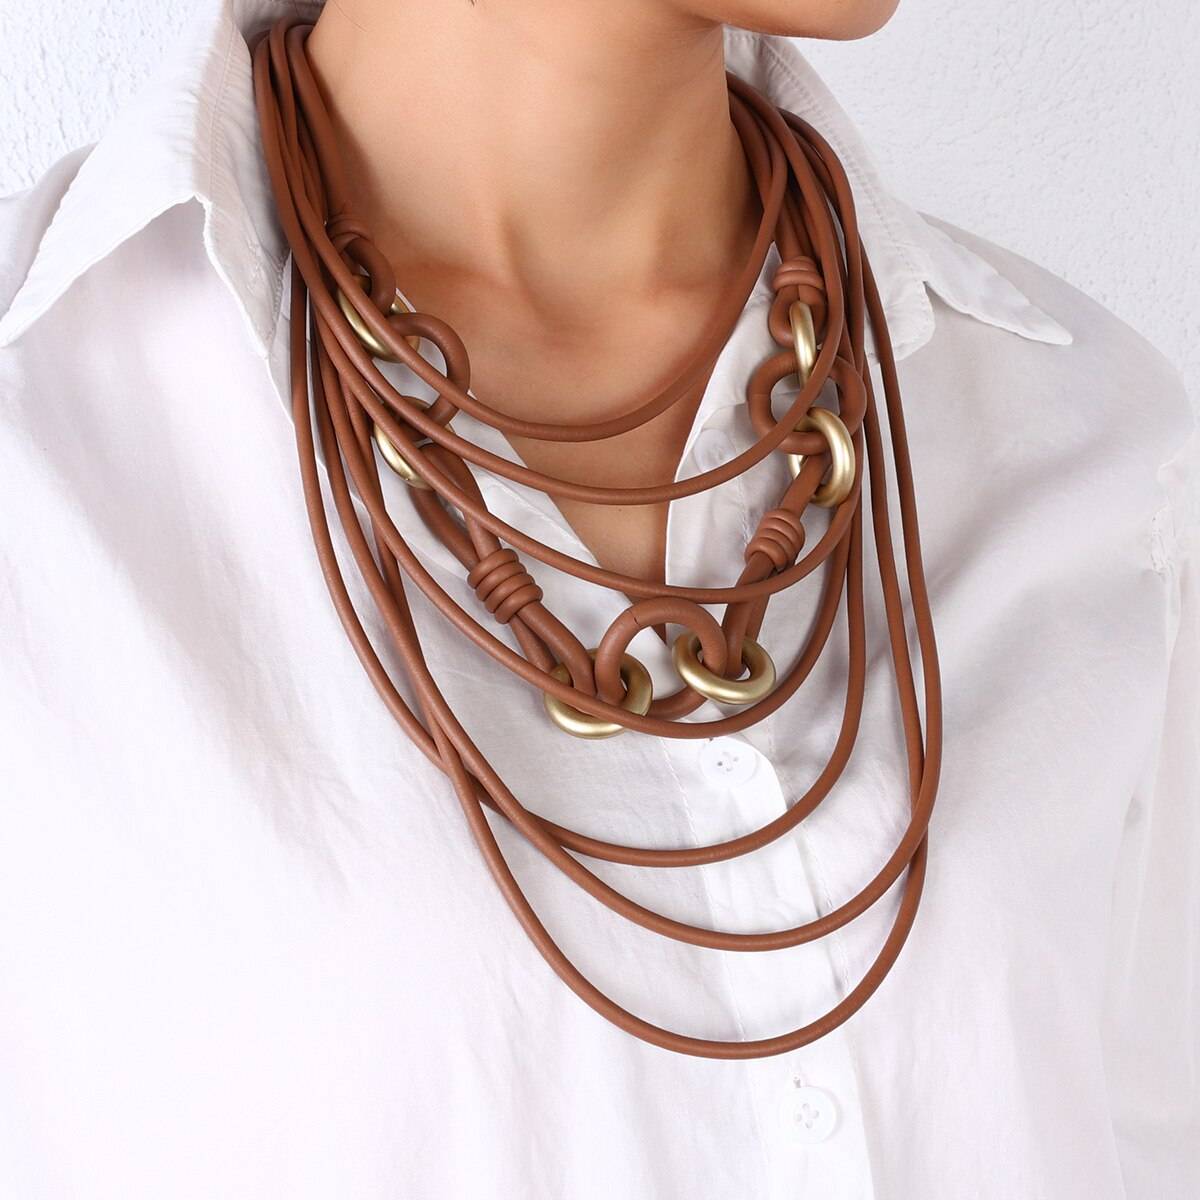 Amorcome Handmade Rubber on the Neck Long Necklace for Women Jewelry Punk Circle Sweater Chain Necklace Clothing Accessories Uncategorized 8d255f28538fbae46aeae7: Brown